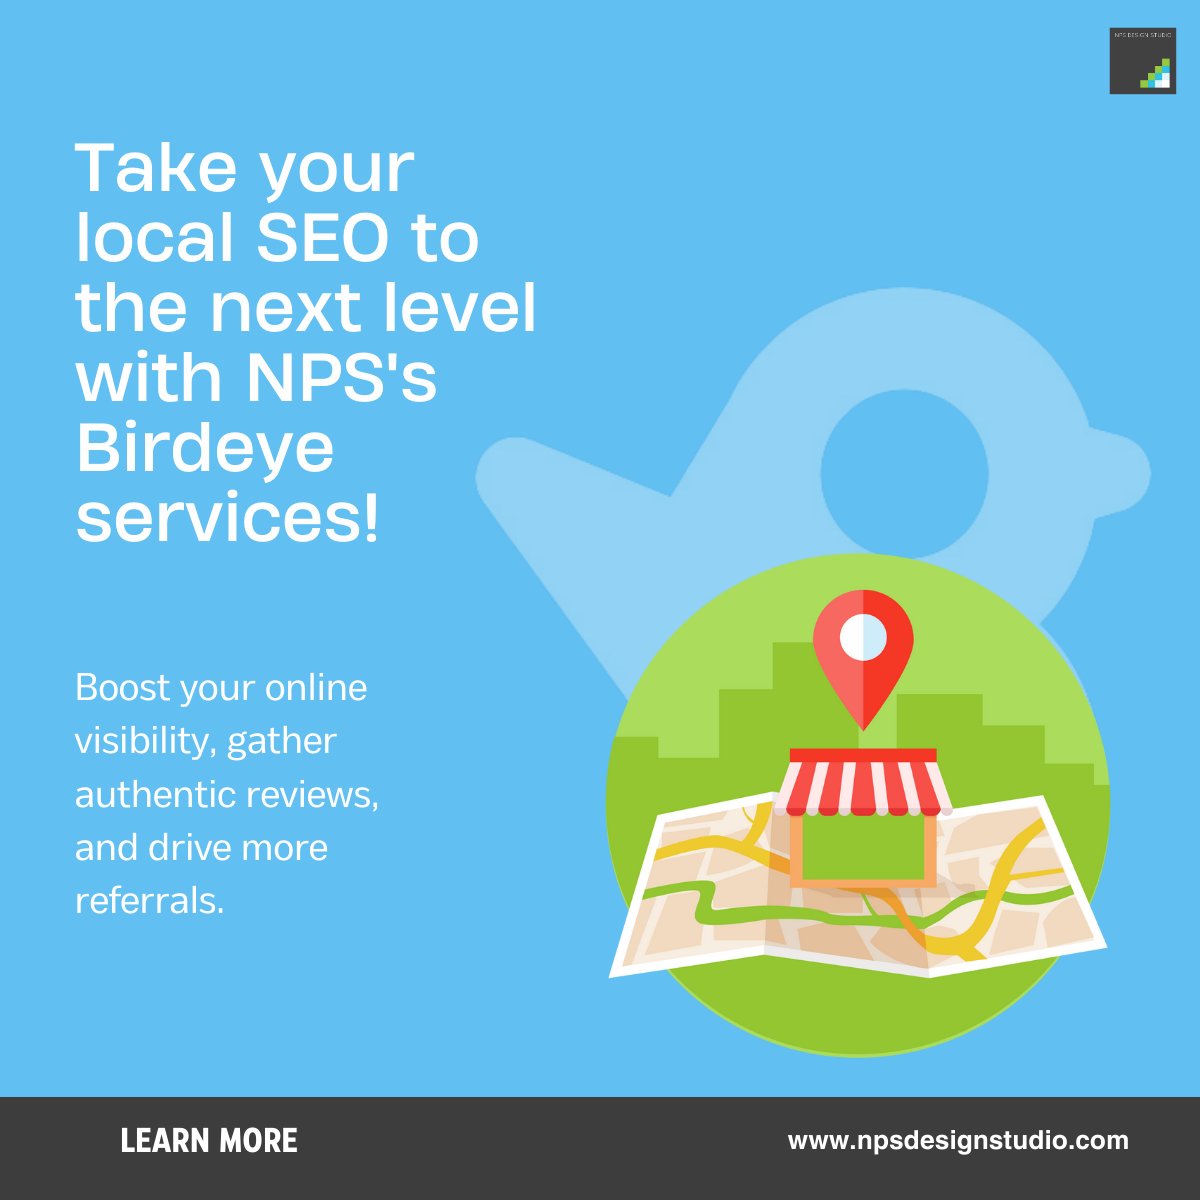 Boost your local SEO with NPS's Birdeye services! Enhance your online presence, garner credible reviews, and drive referrals. Be seen everywhere with map integrations and captivate with custom pages for better conversions. Let NPS show you how! #LocalSEO #Birdeye #NPSDesignStudio